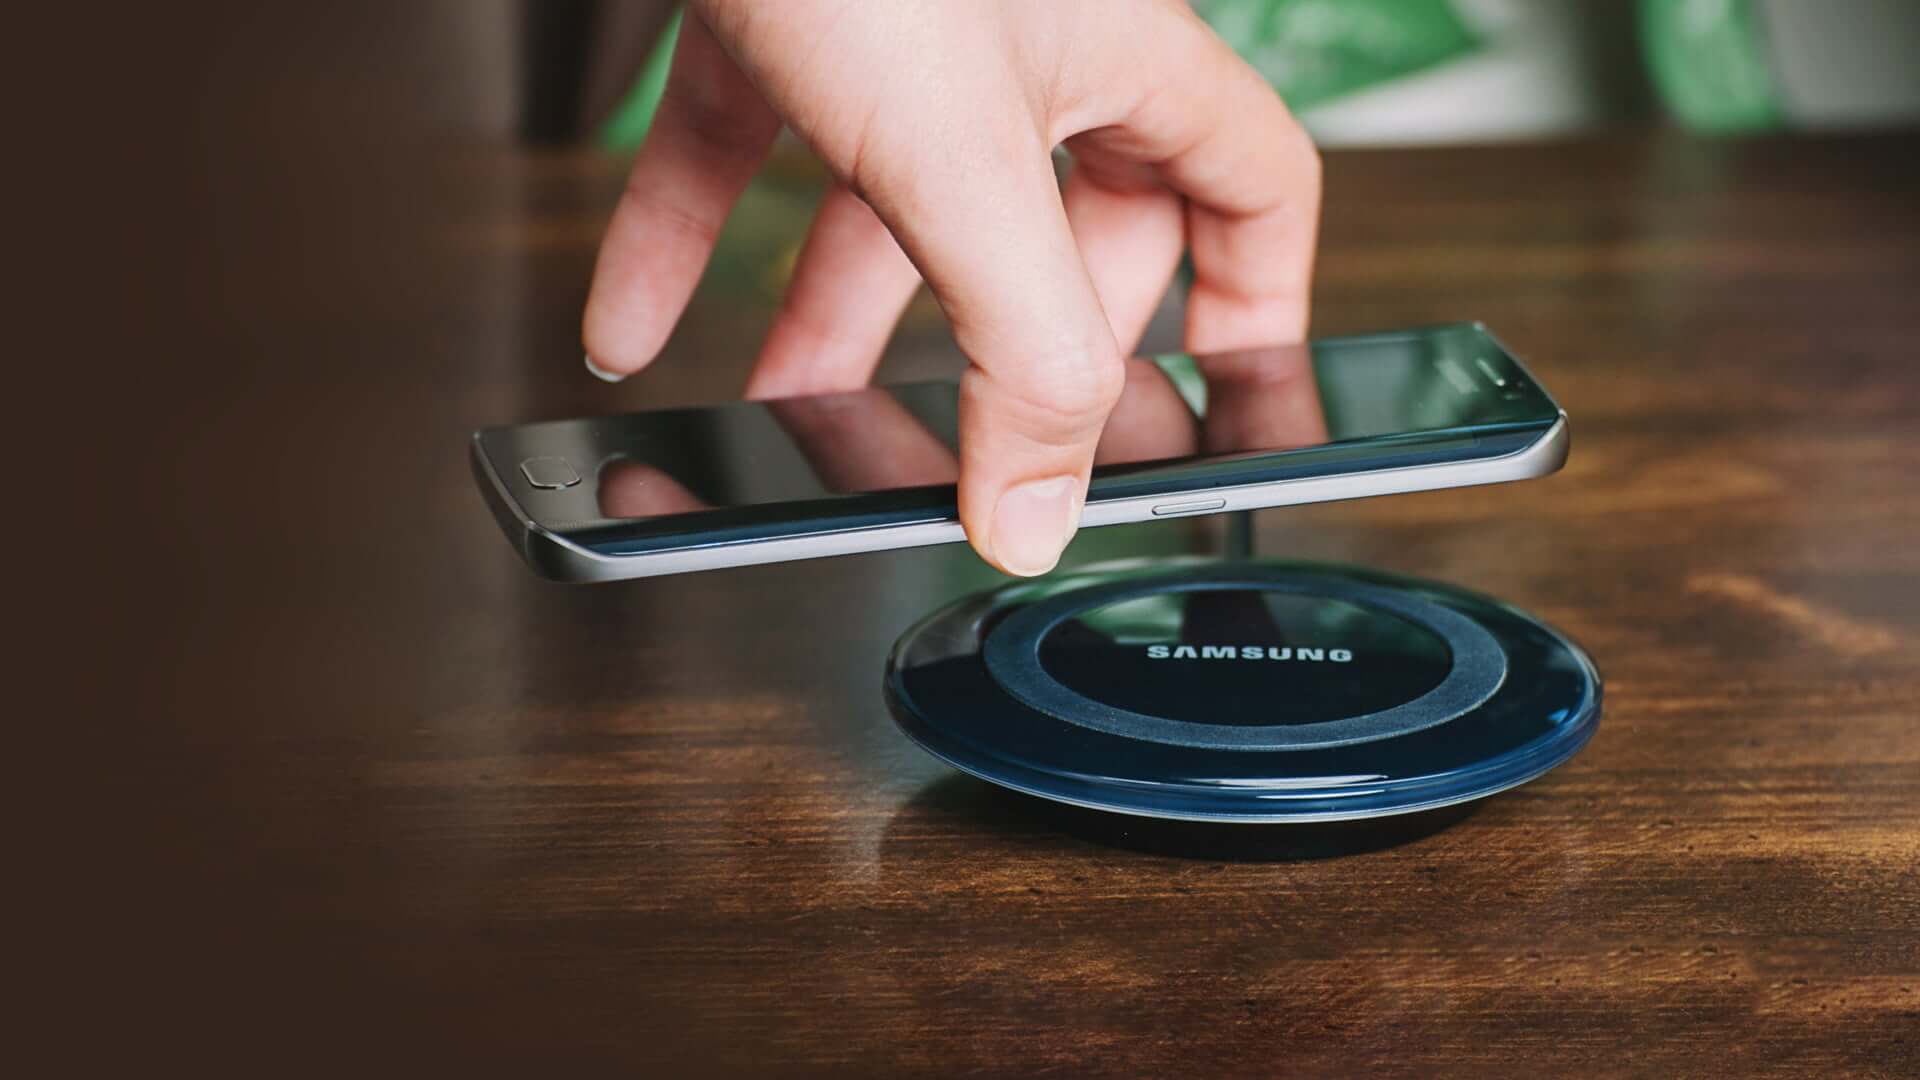 Walmart (WMT) Will Adopt Wireless Charging for IoT after FCC Greenlight